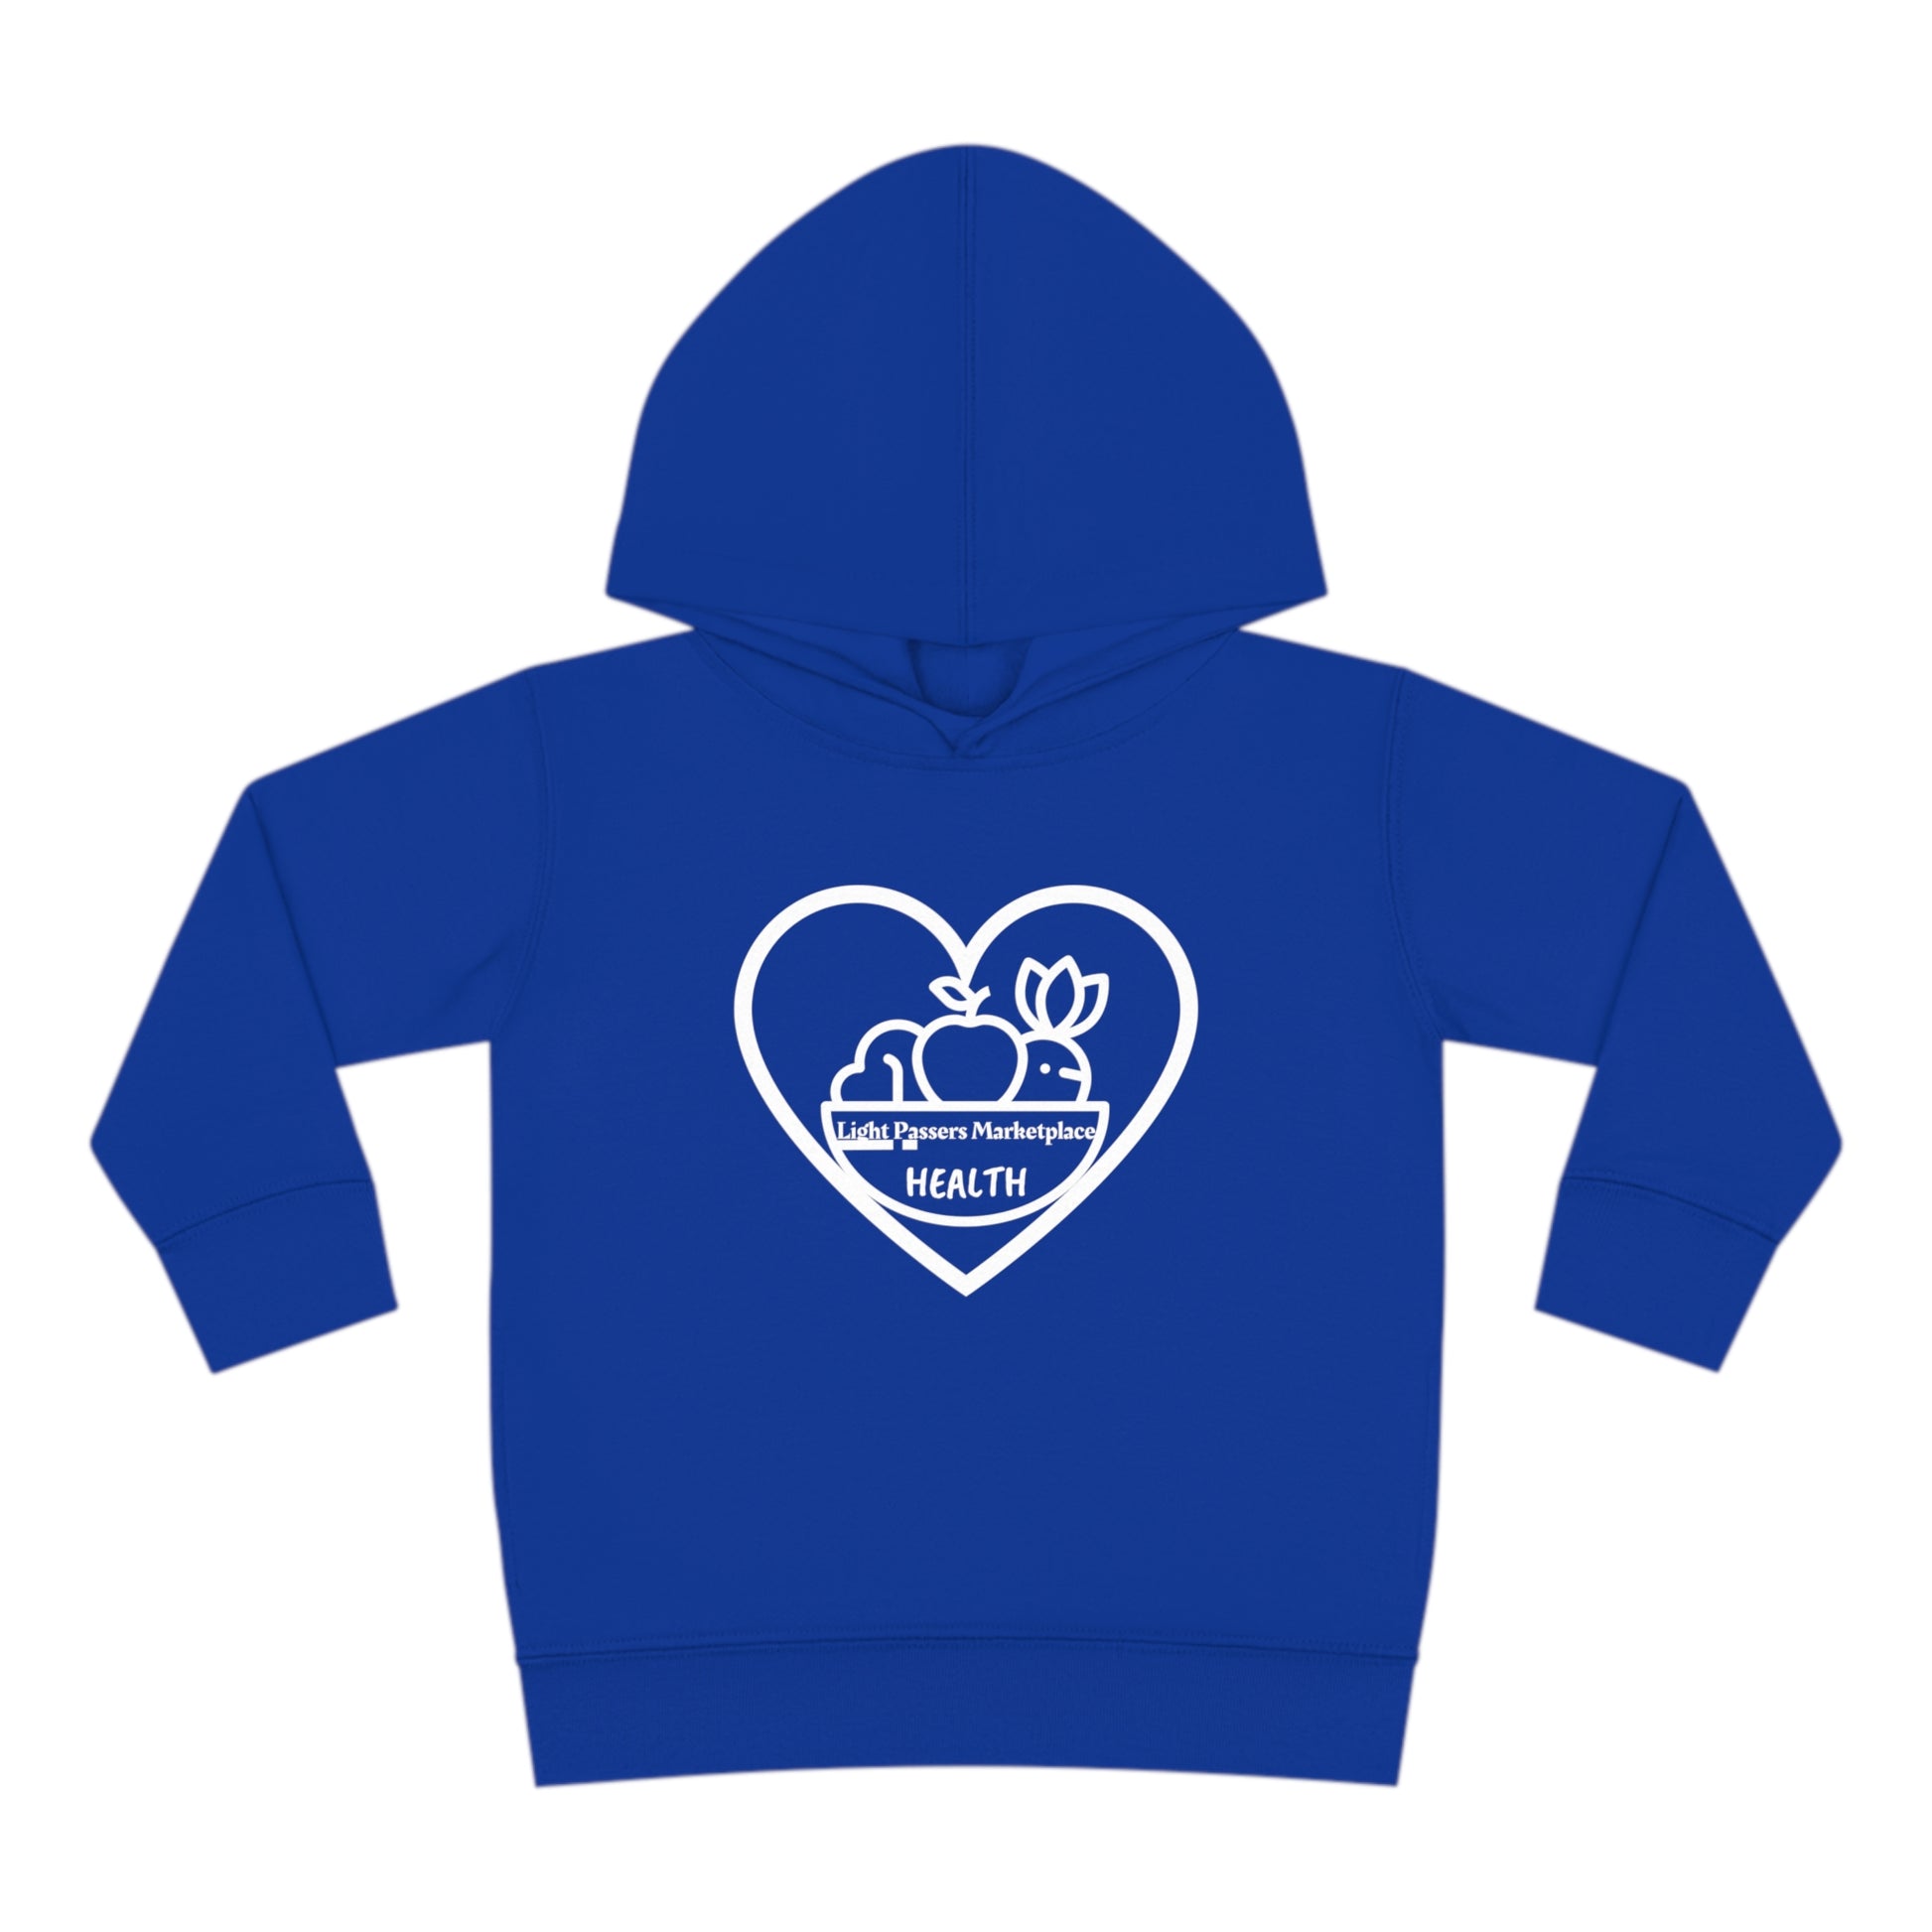 A Fruit Basket Toddler Hoodie with heart and apple logo design, jersey-lined hood, double-needle stitching, cover-stitched details, side seam pockets, and EasyTear™ label for comfort and durability.